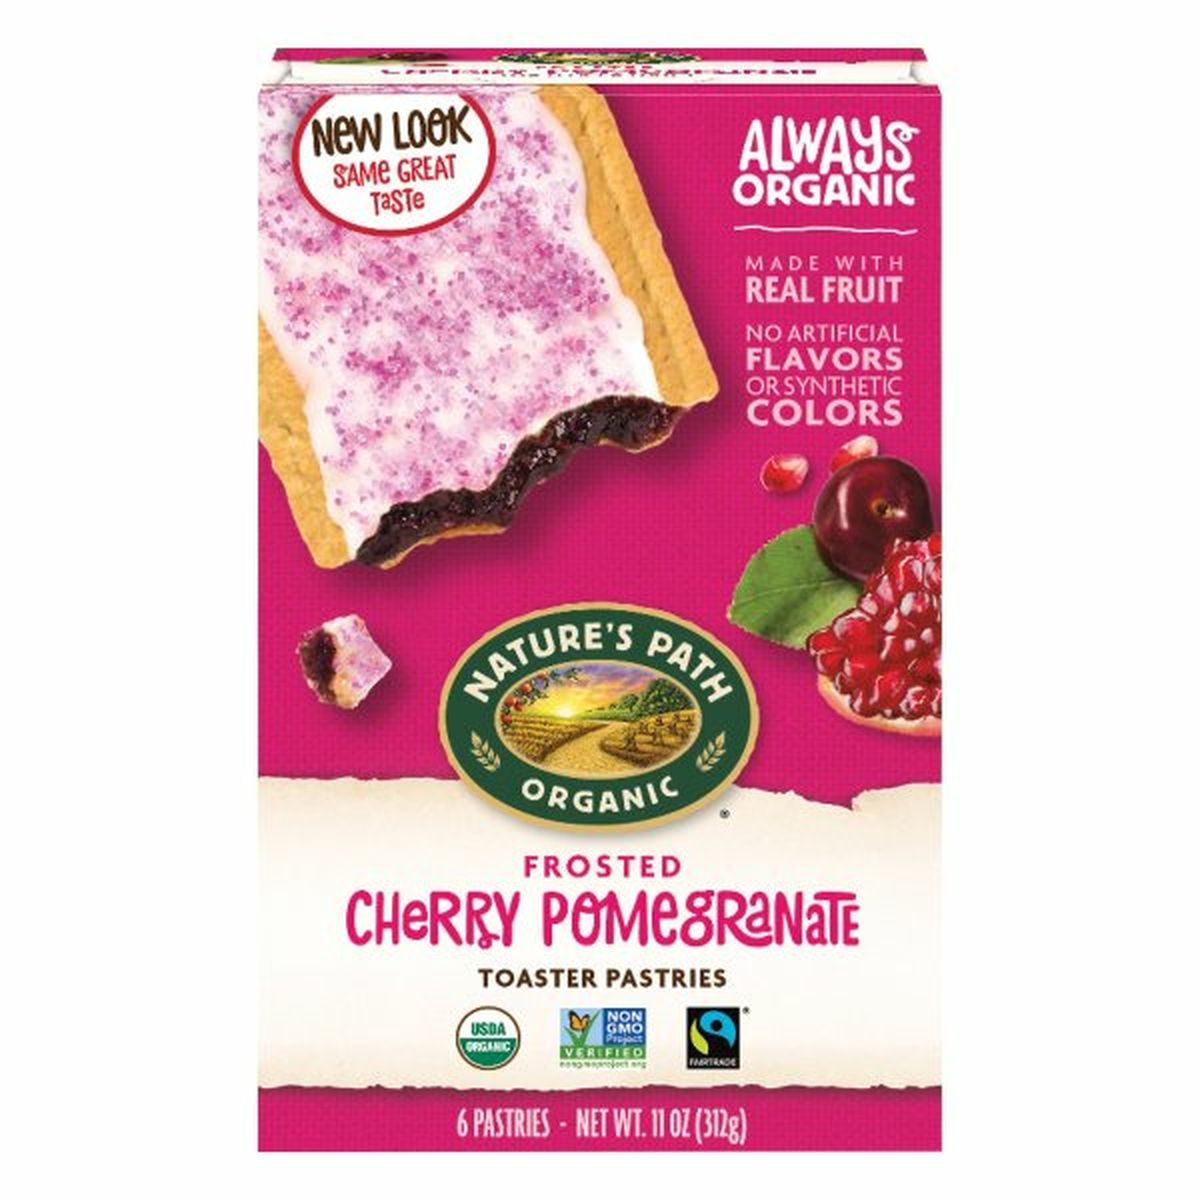 Calories in Nature's Path Toaster Pastries, Cherry Pomegranate, Frosted